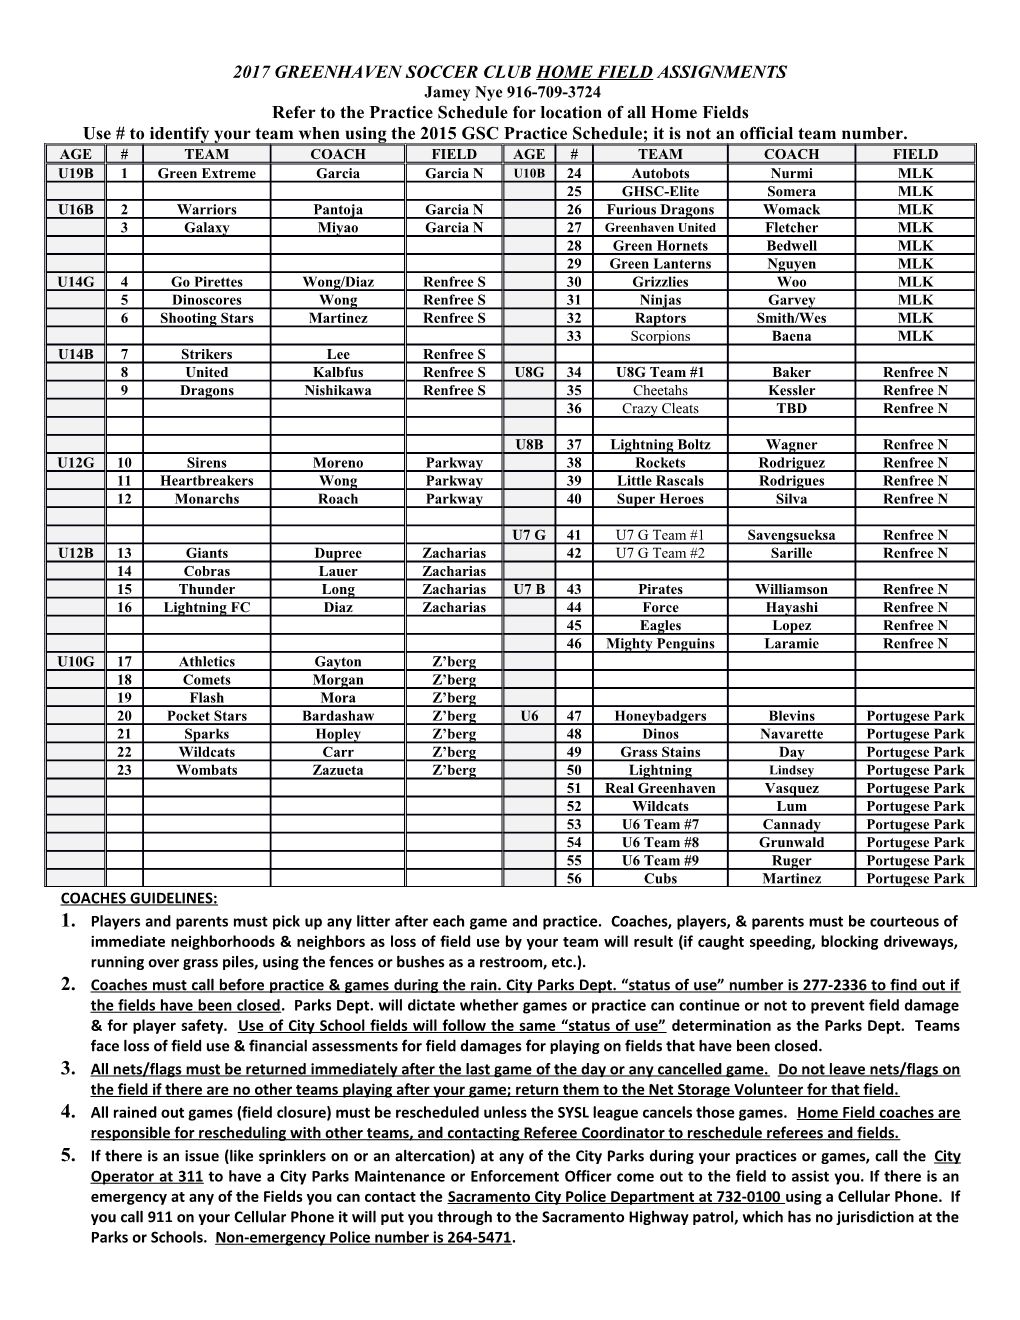 2001 Gsc Home Field Assignments